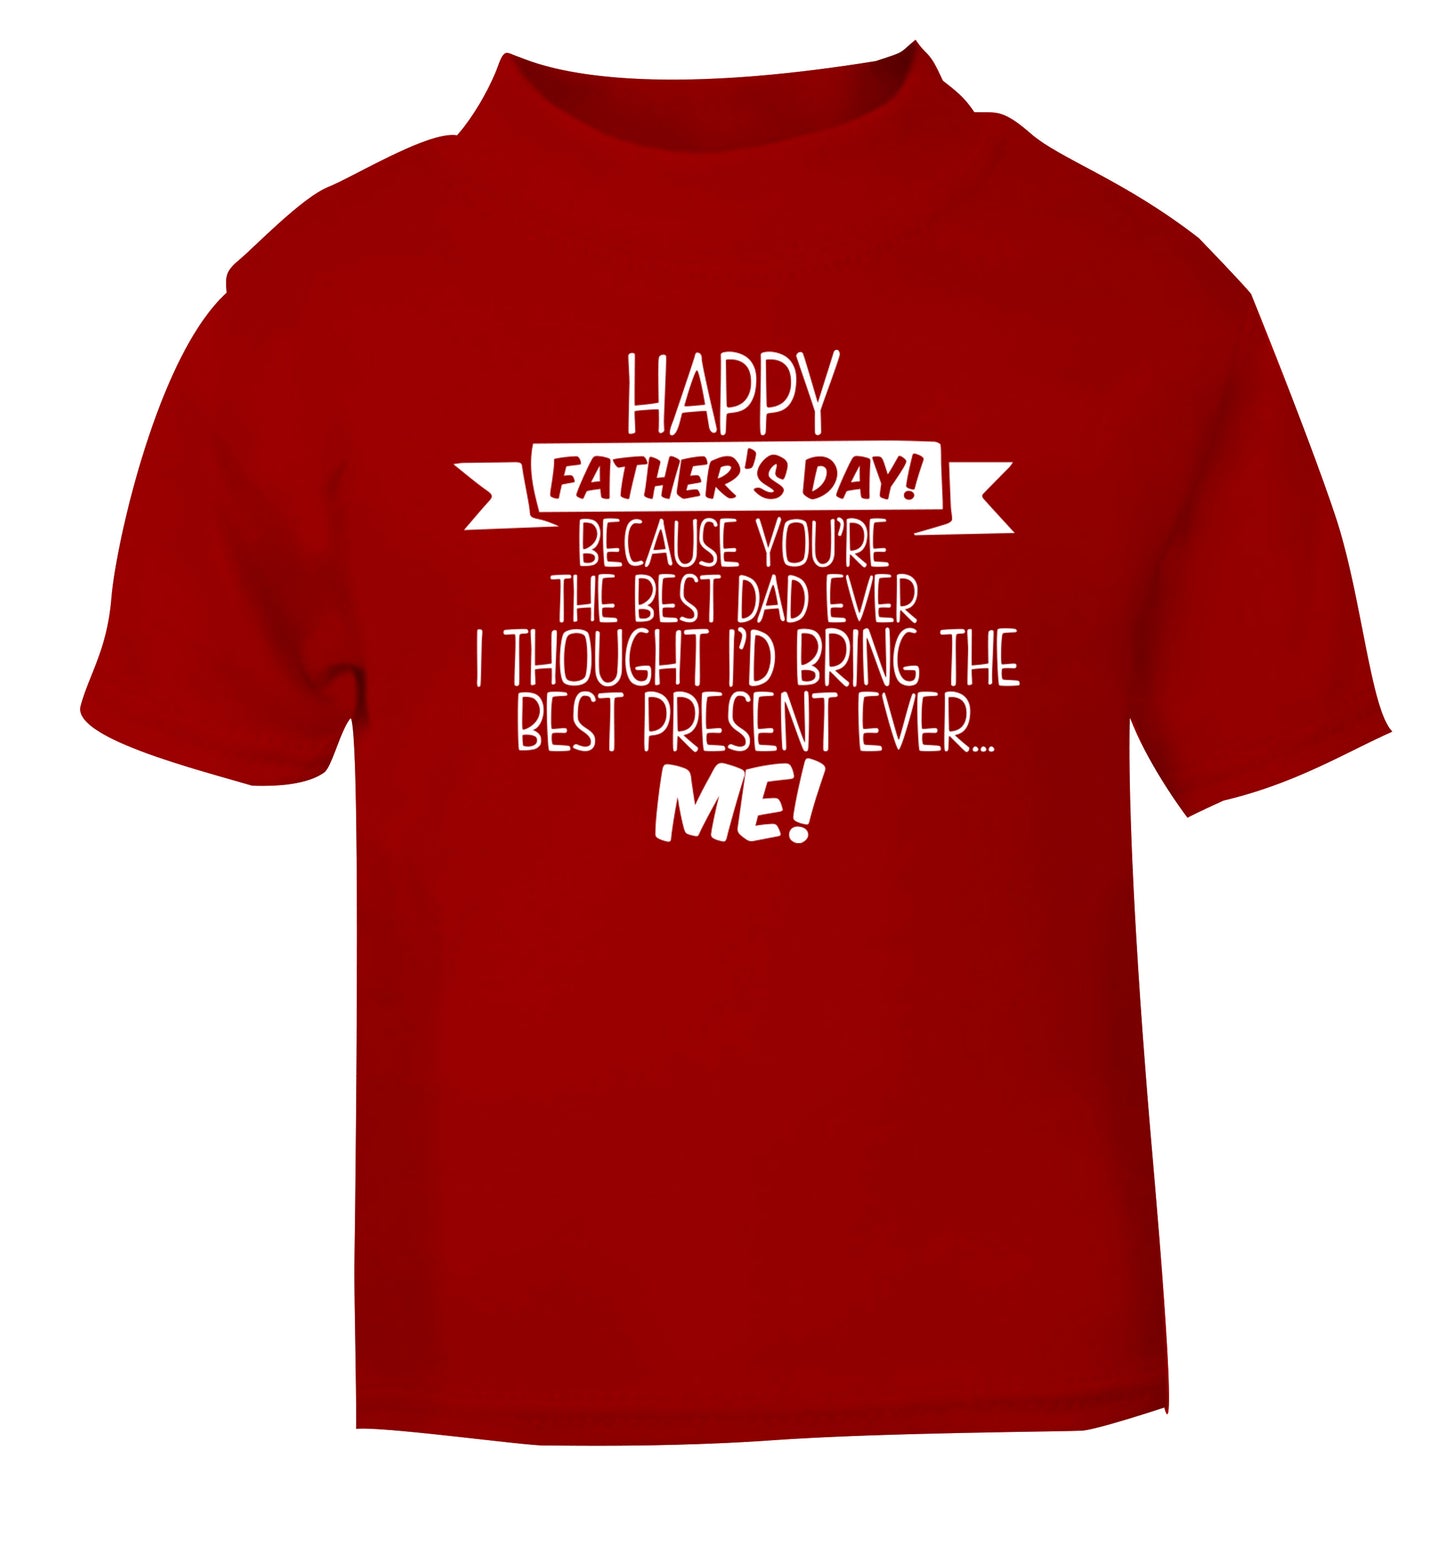 Happy Father's day, because you're the best dad ever I thought I'd bring the best present ever...me! red Baby Toddler Tshirt 2 Years